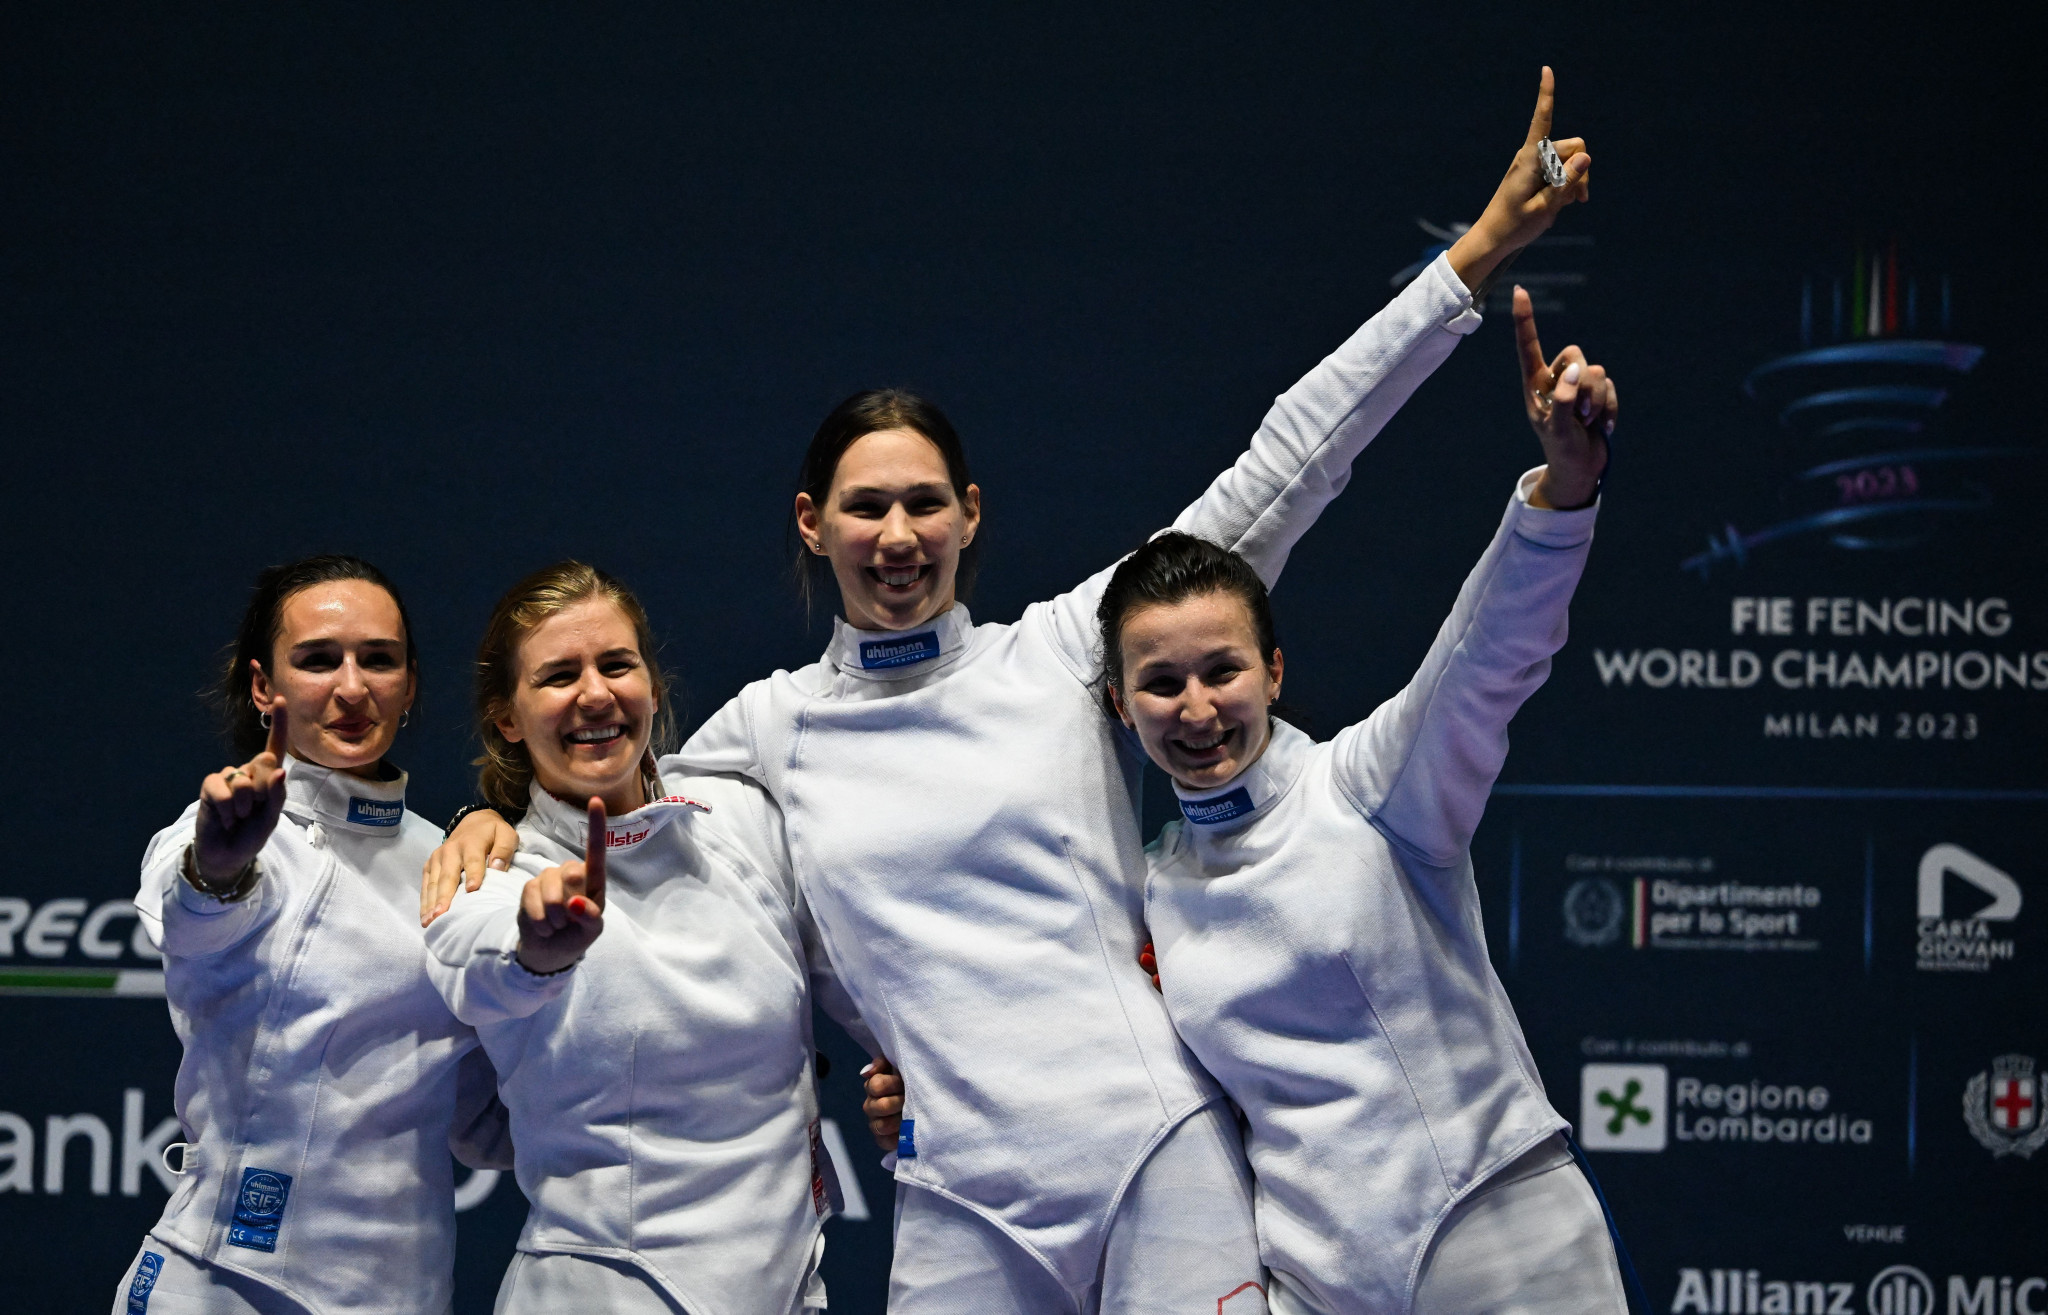 Poland earned gold in the women's team épée at the FIE Fencing World Championships in Milan ©Getty Images